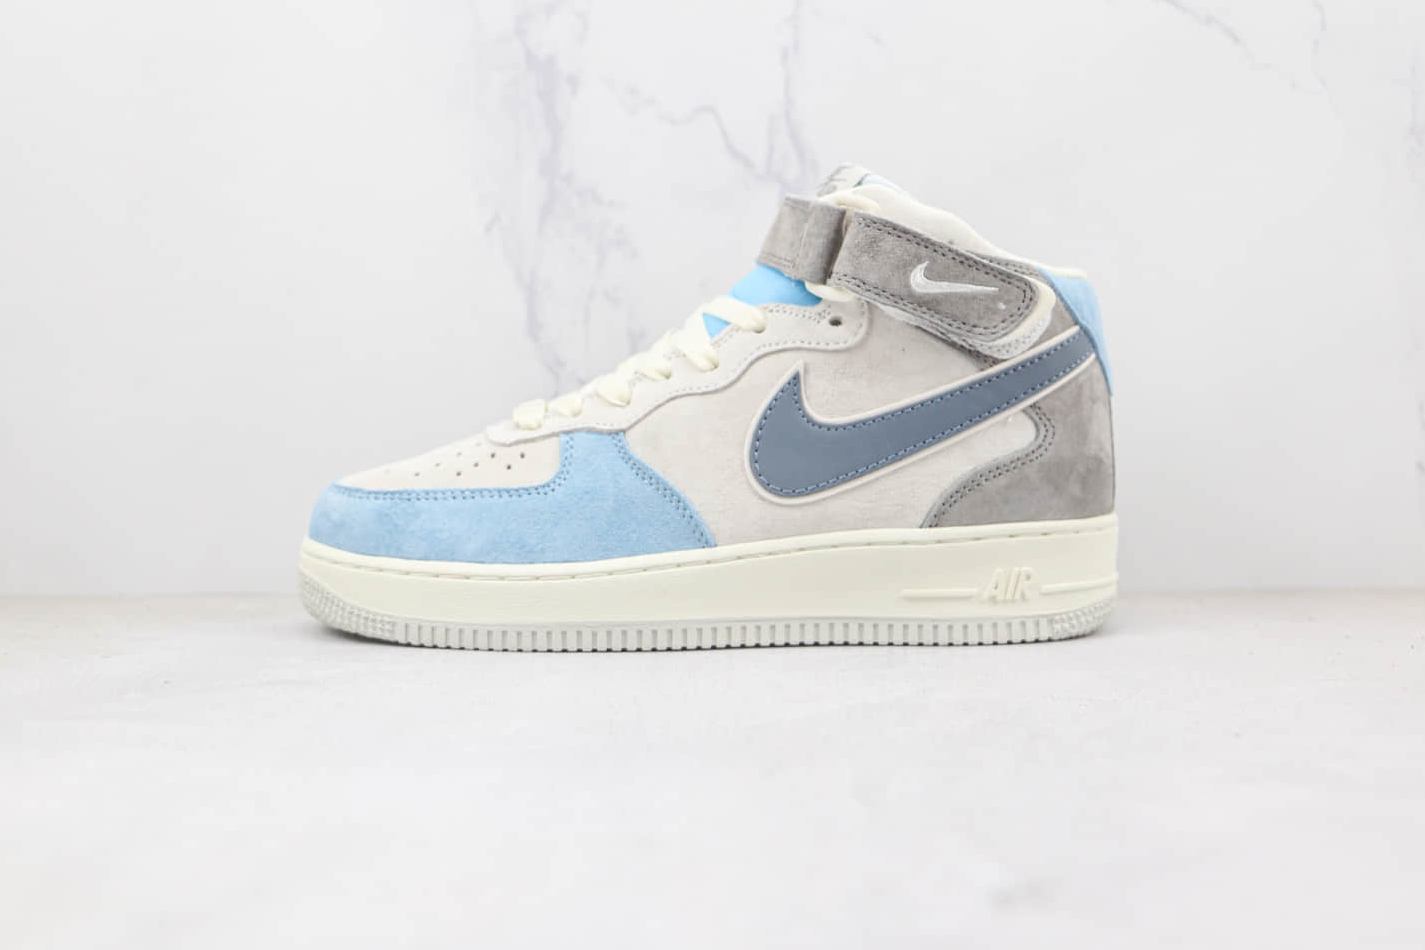 Nike Air Force 1 07 Mid Light Grey Blue White Shoes AL6896-559 - Stylish and Comfortable Sneakers for Men